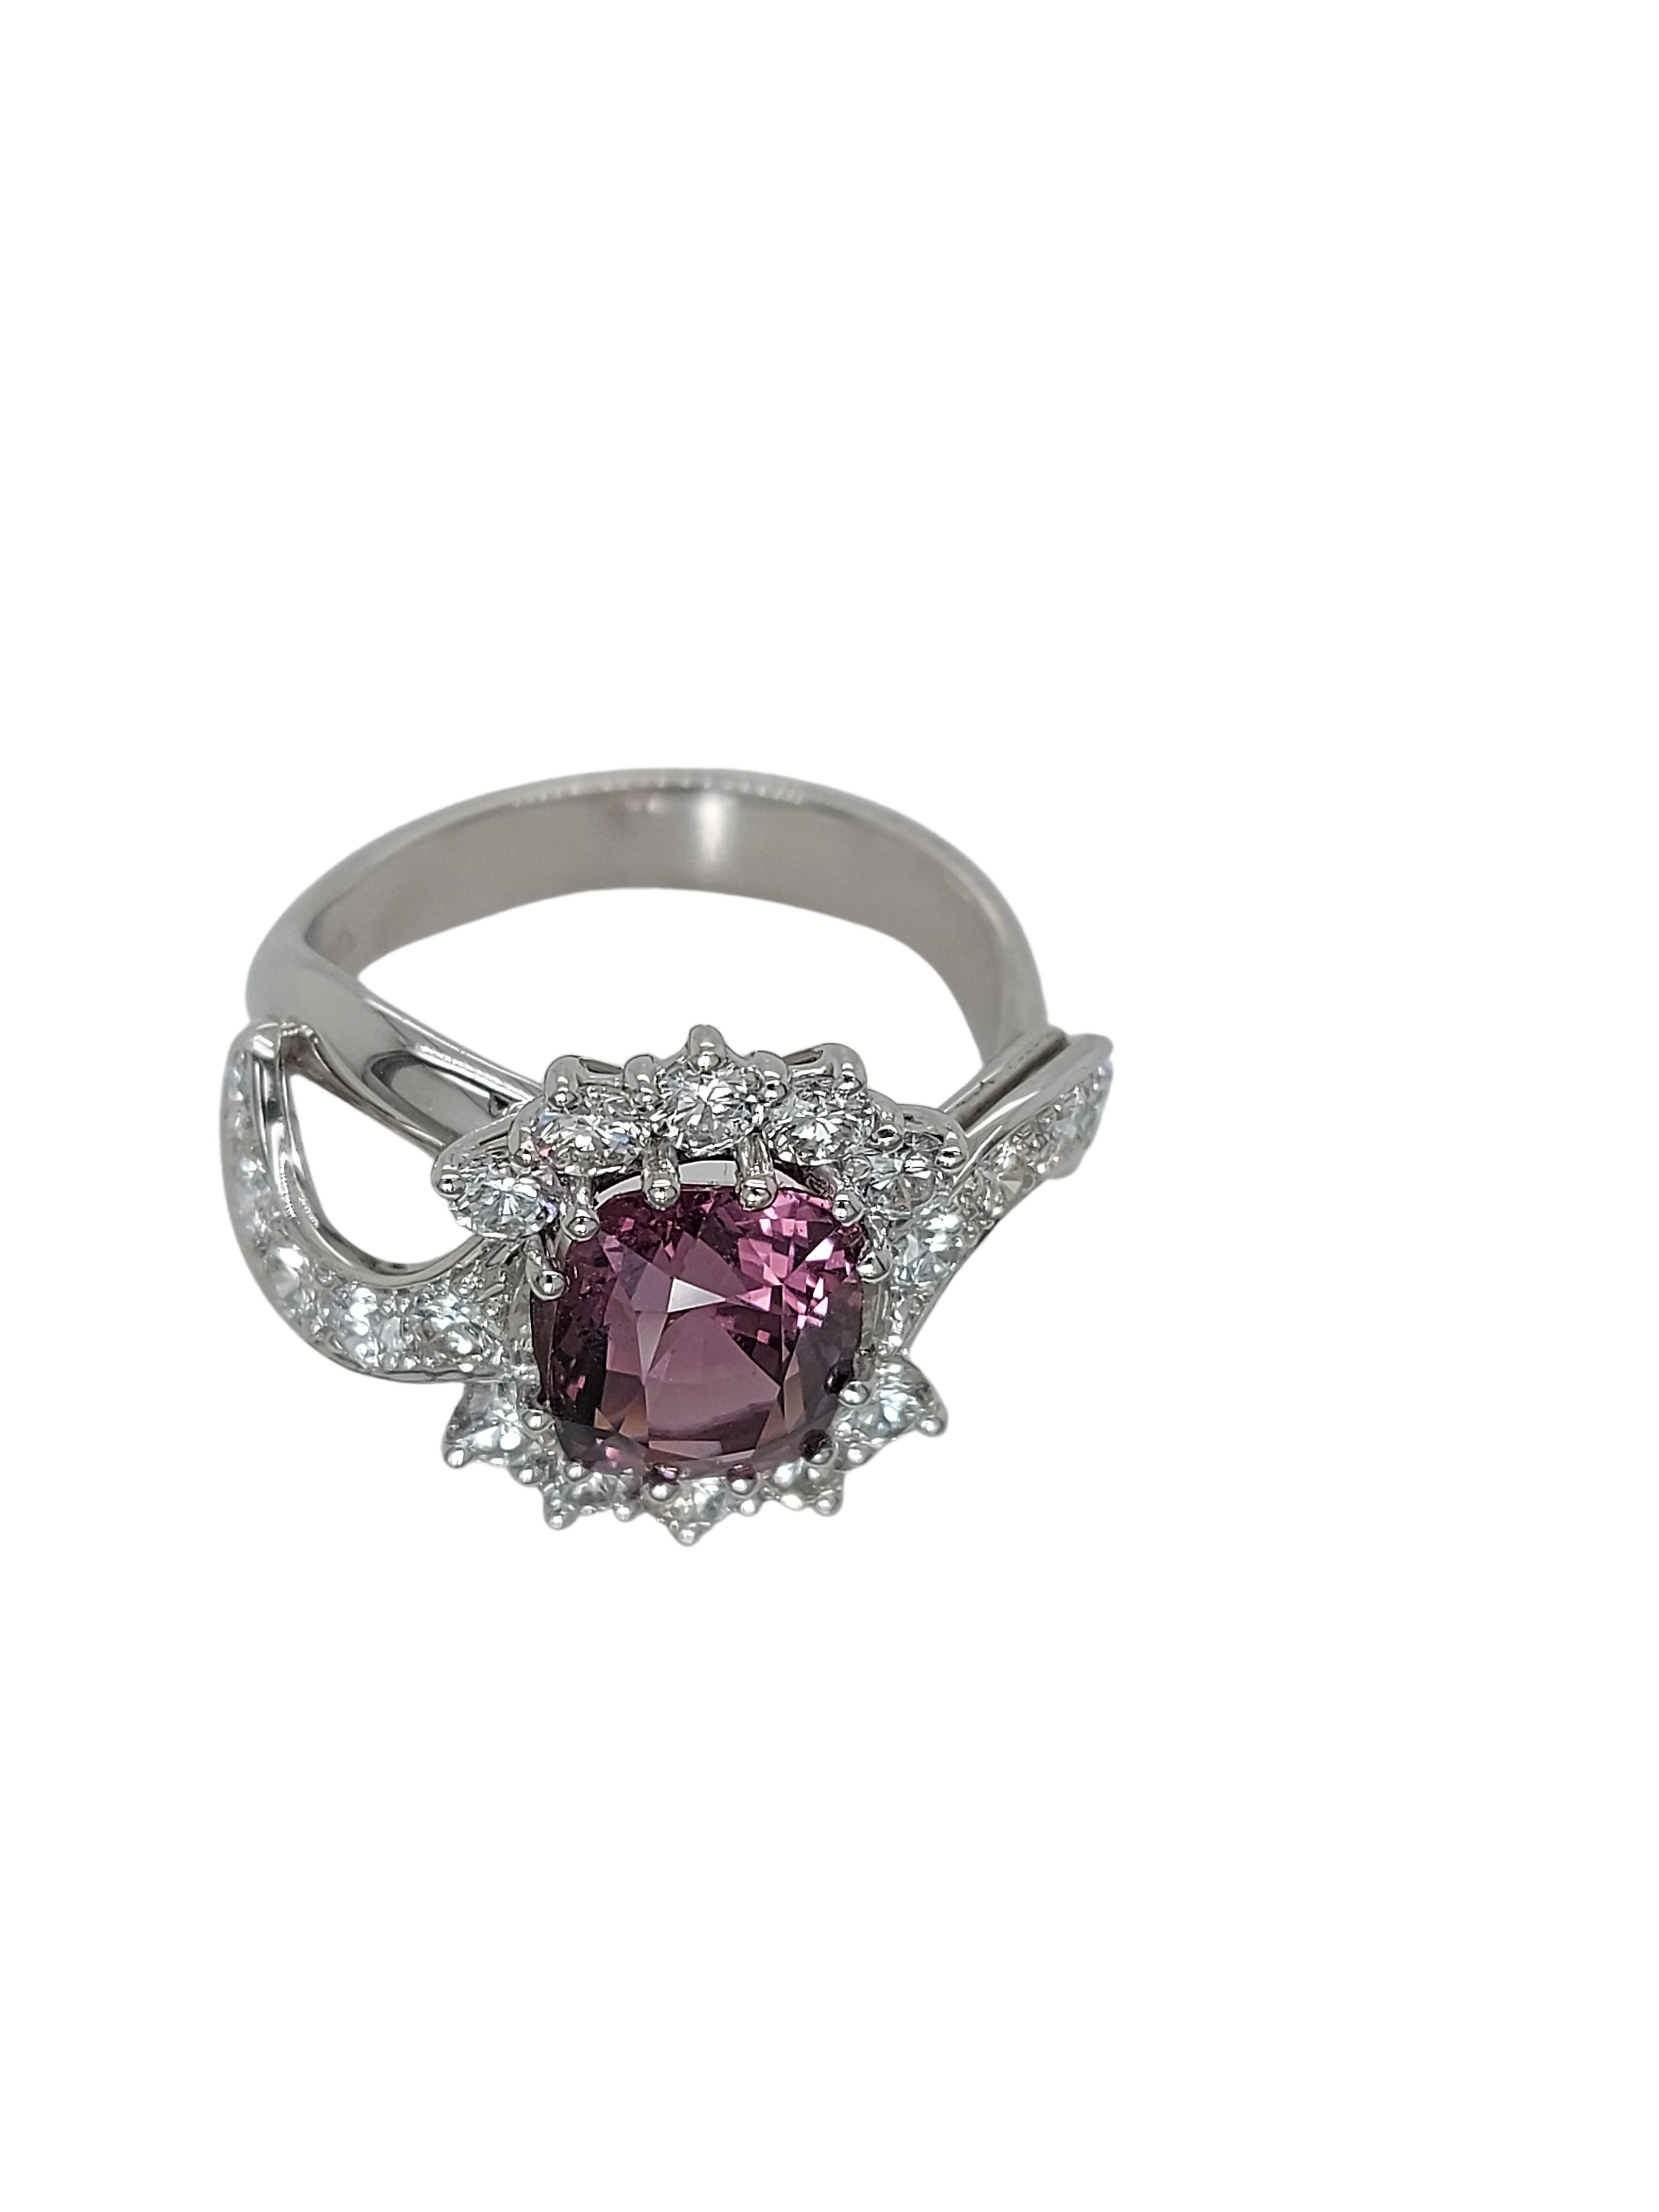 18kt White Gold Ring with a 3.25 Ct No Heat Spinel Stone and 1.2ct Diamonds For Sale 6